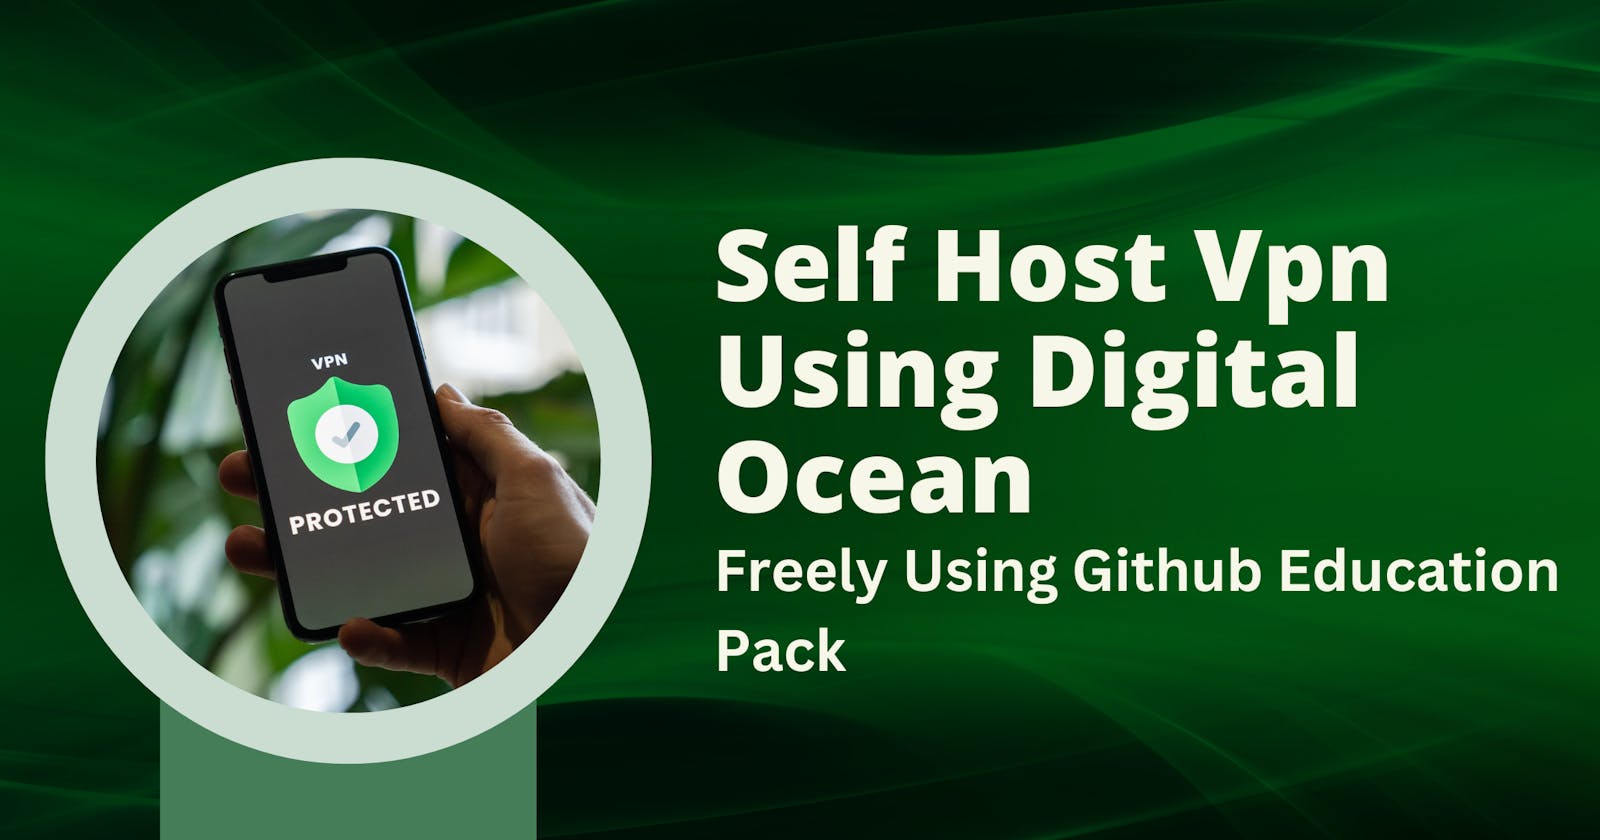 How to setup self hosted free vpn with github education pack